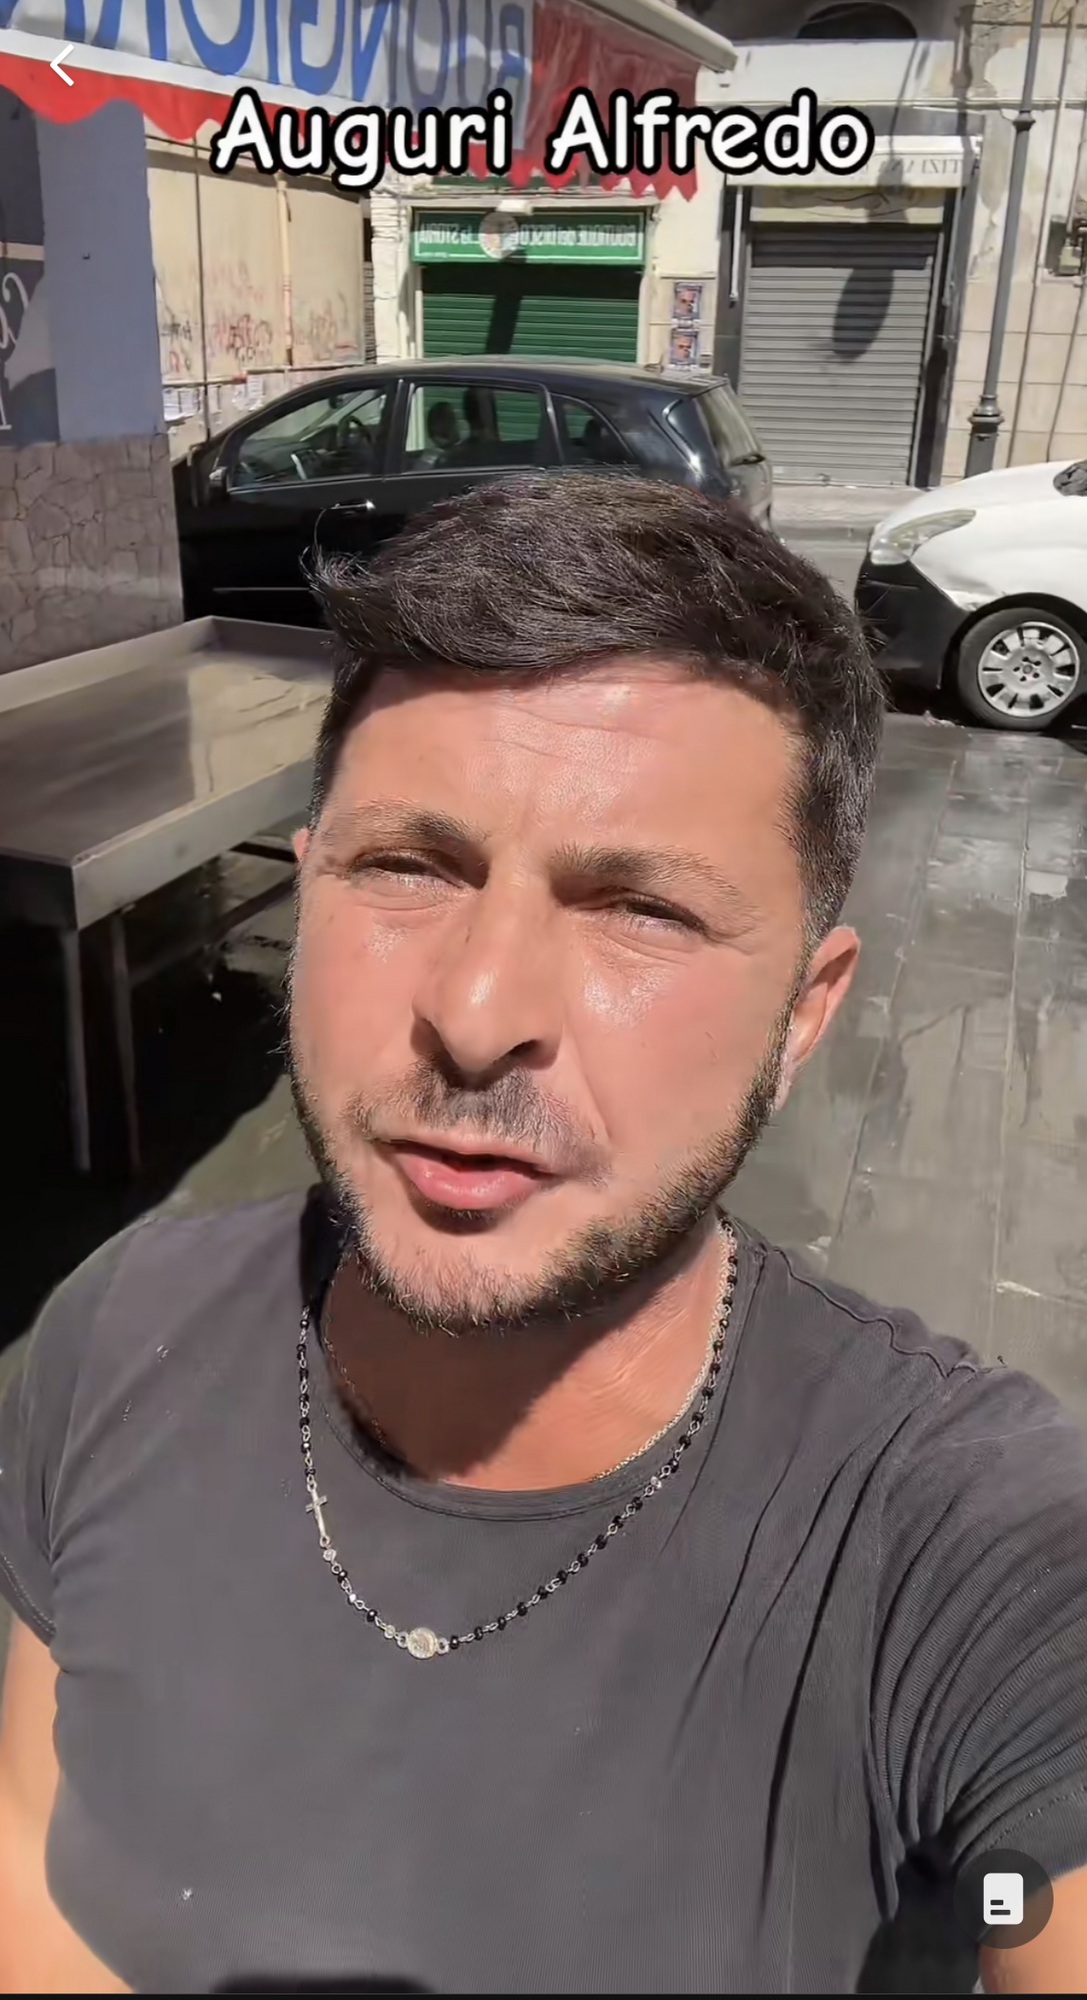 A ''lookalike'' of Volodymyr Zelensky has been found online: he is a fish seller in Naples and a TikTok star. Photos and videos